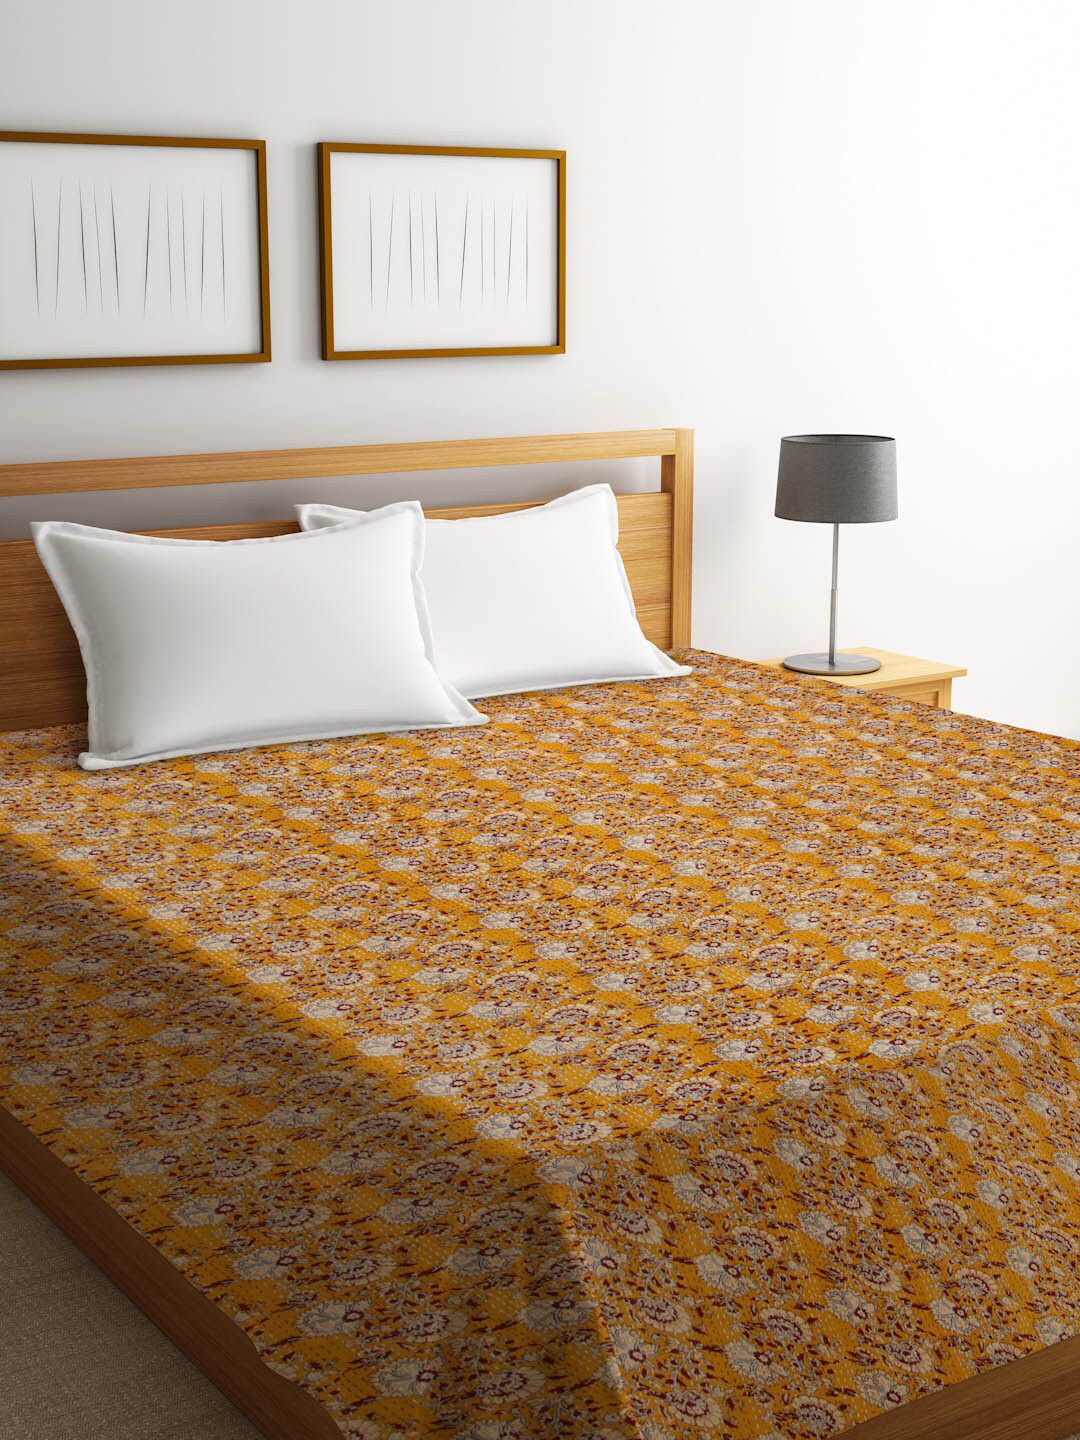 Rajasthan Decor Mustard Floral Jaipuri Kantha Printed Sustainable Cotton Double Bed Cover Price in India